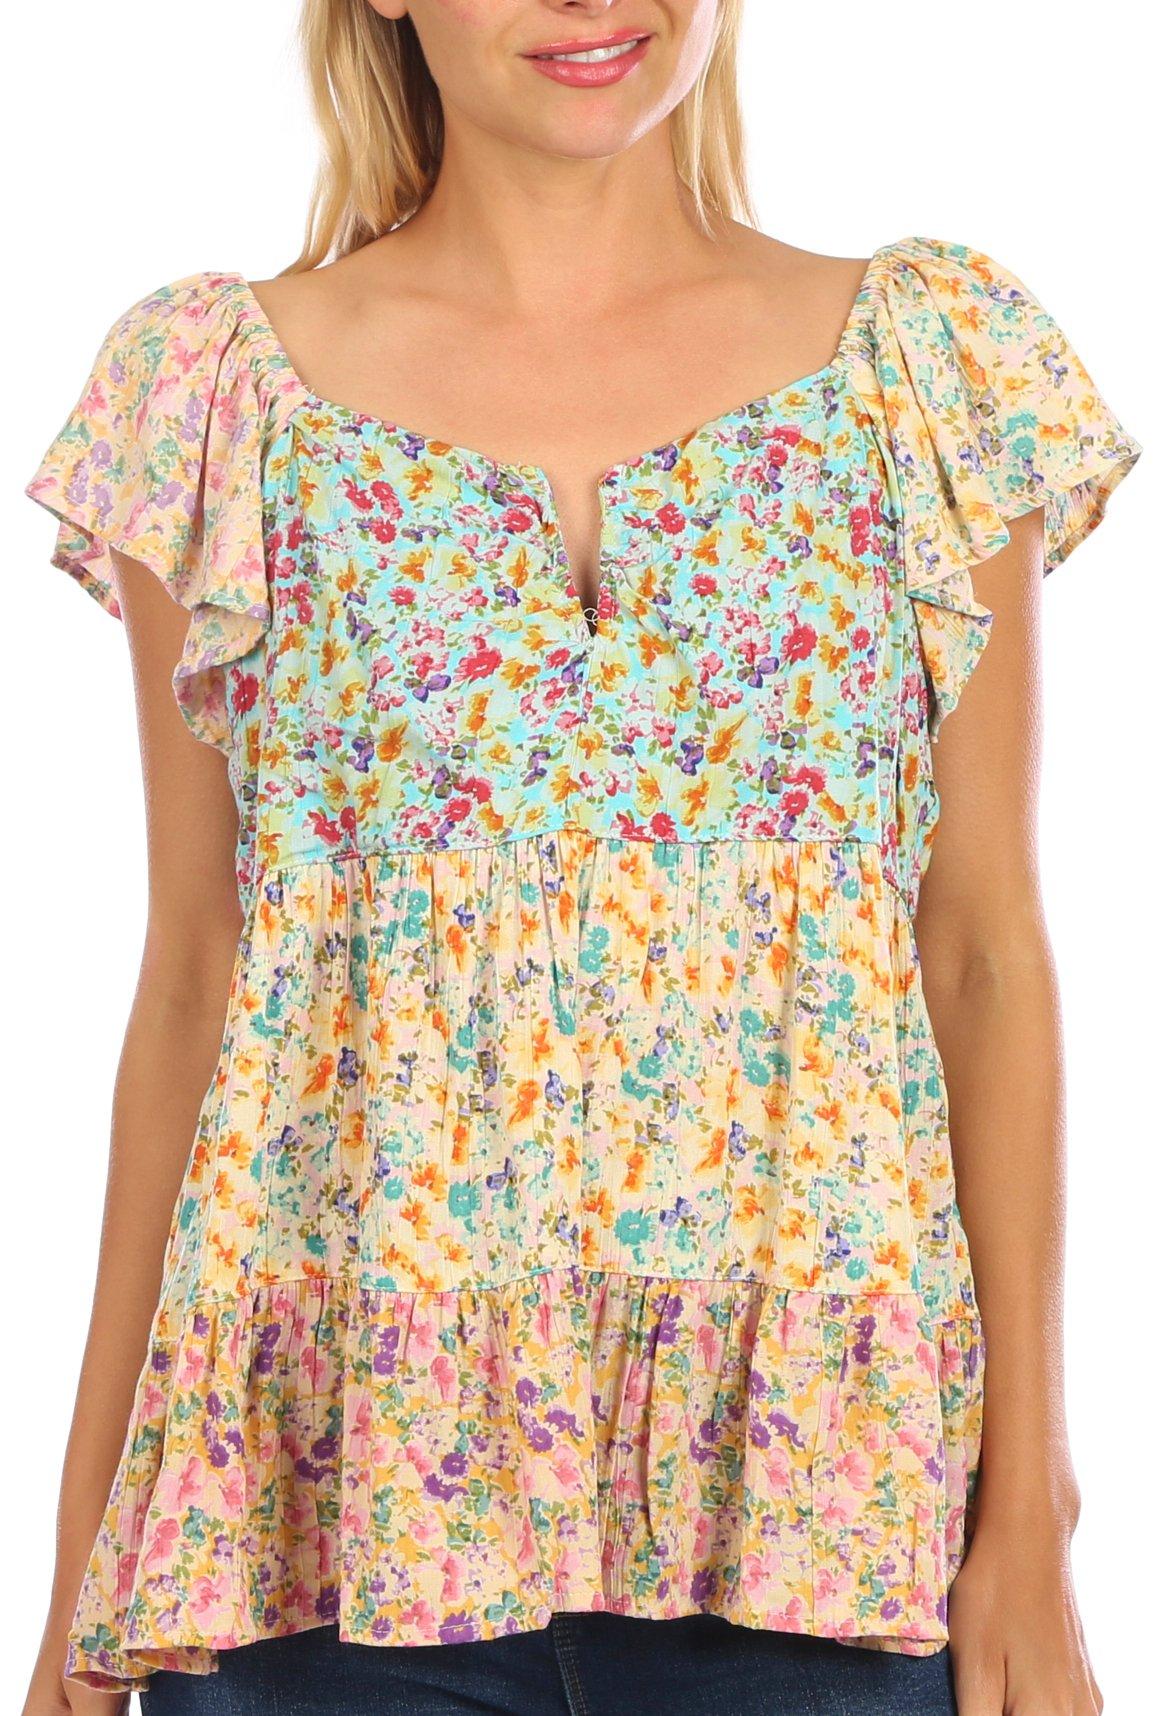 Angie Juniors Short Sleeve Floral Colorblocked Top